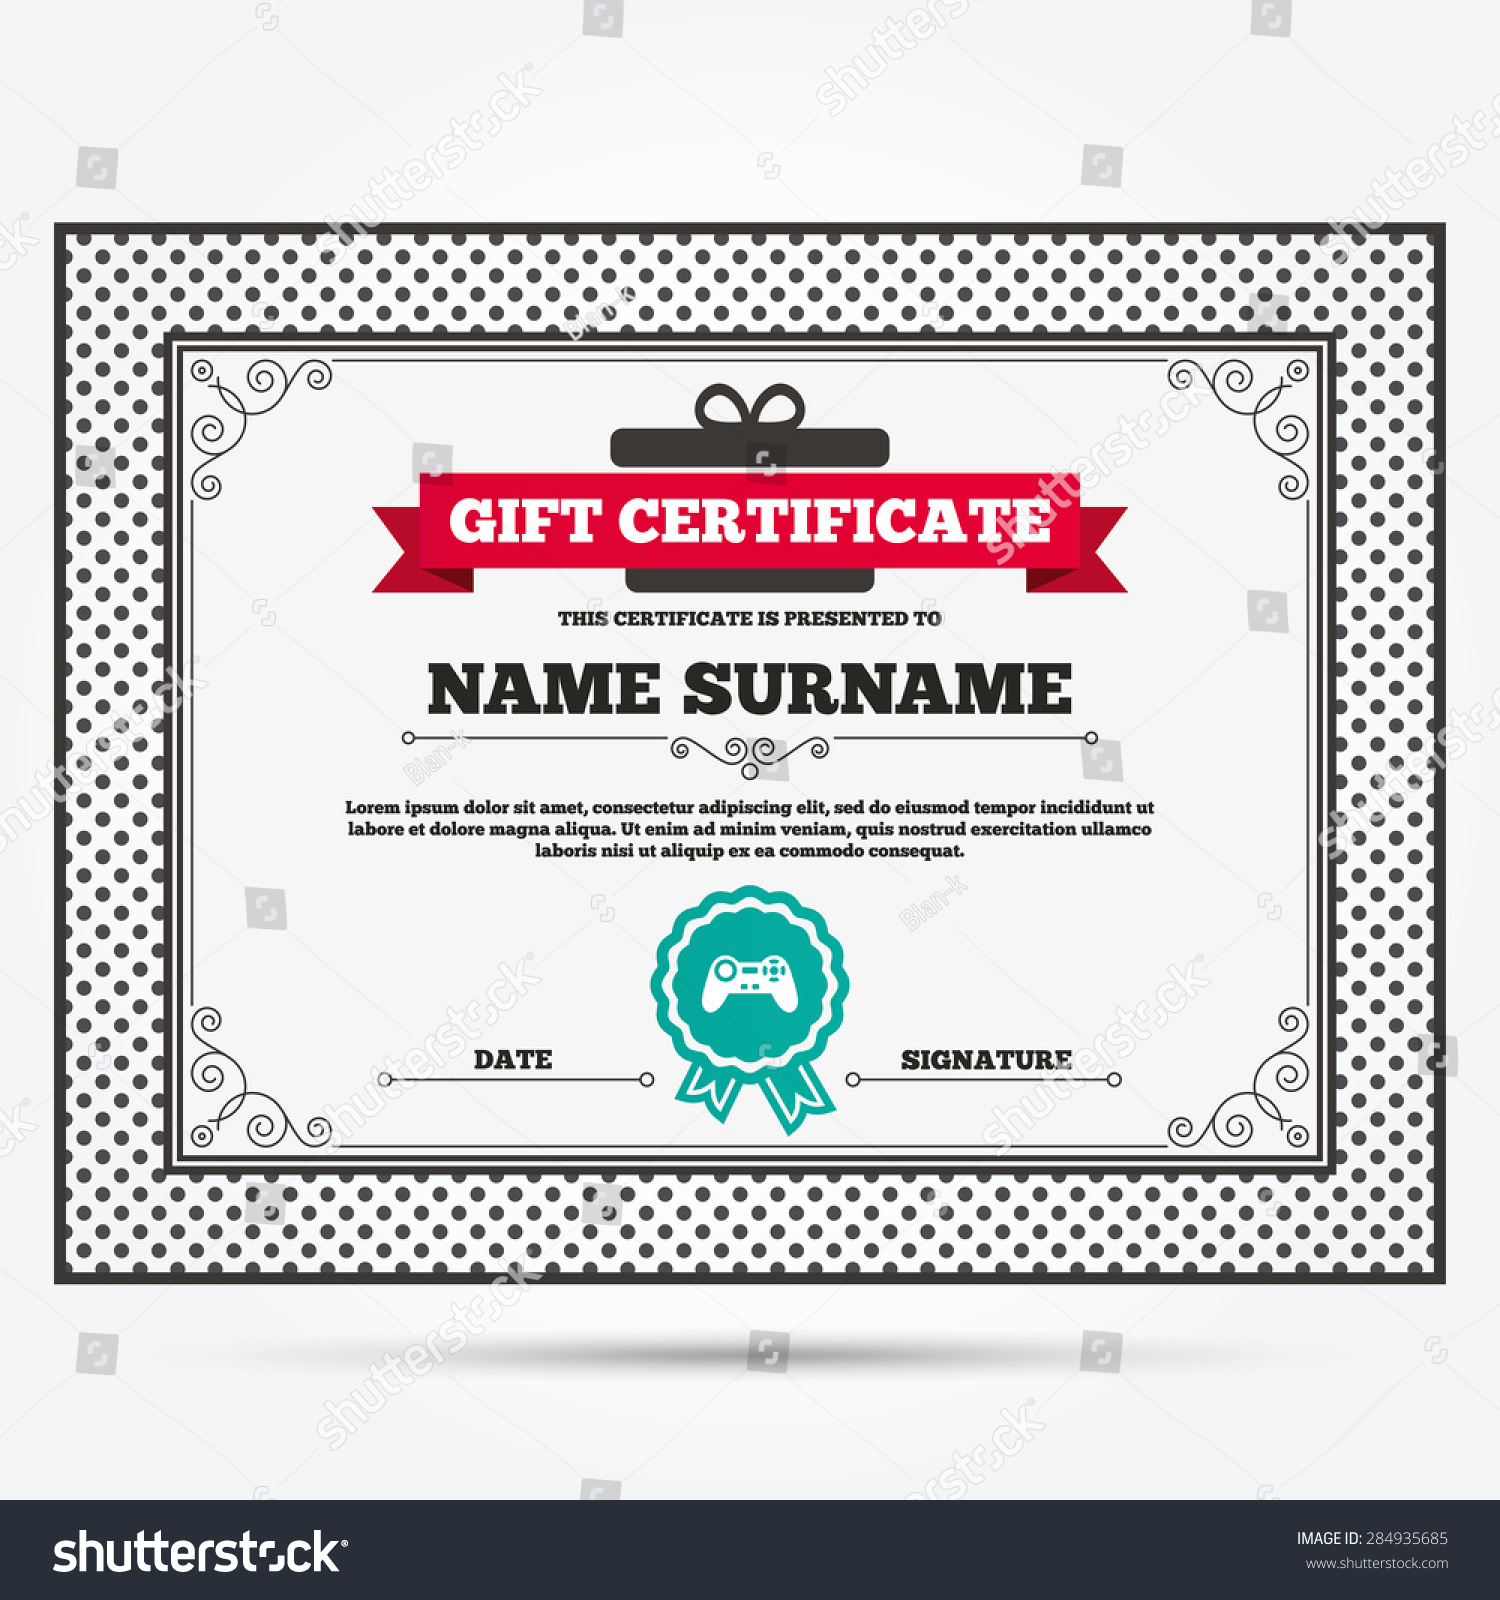 Gift Certificate Joystick Sign Icon Video Stock Vector ...